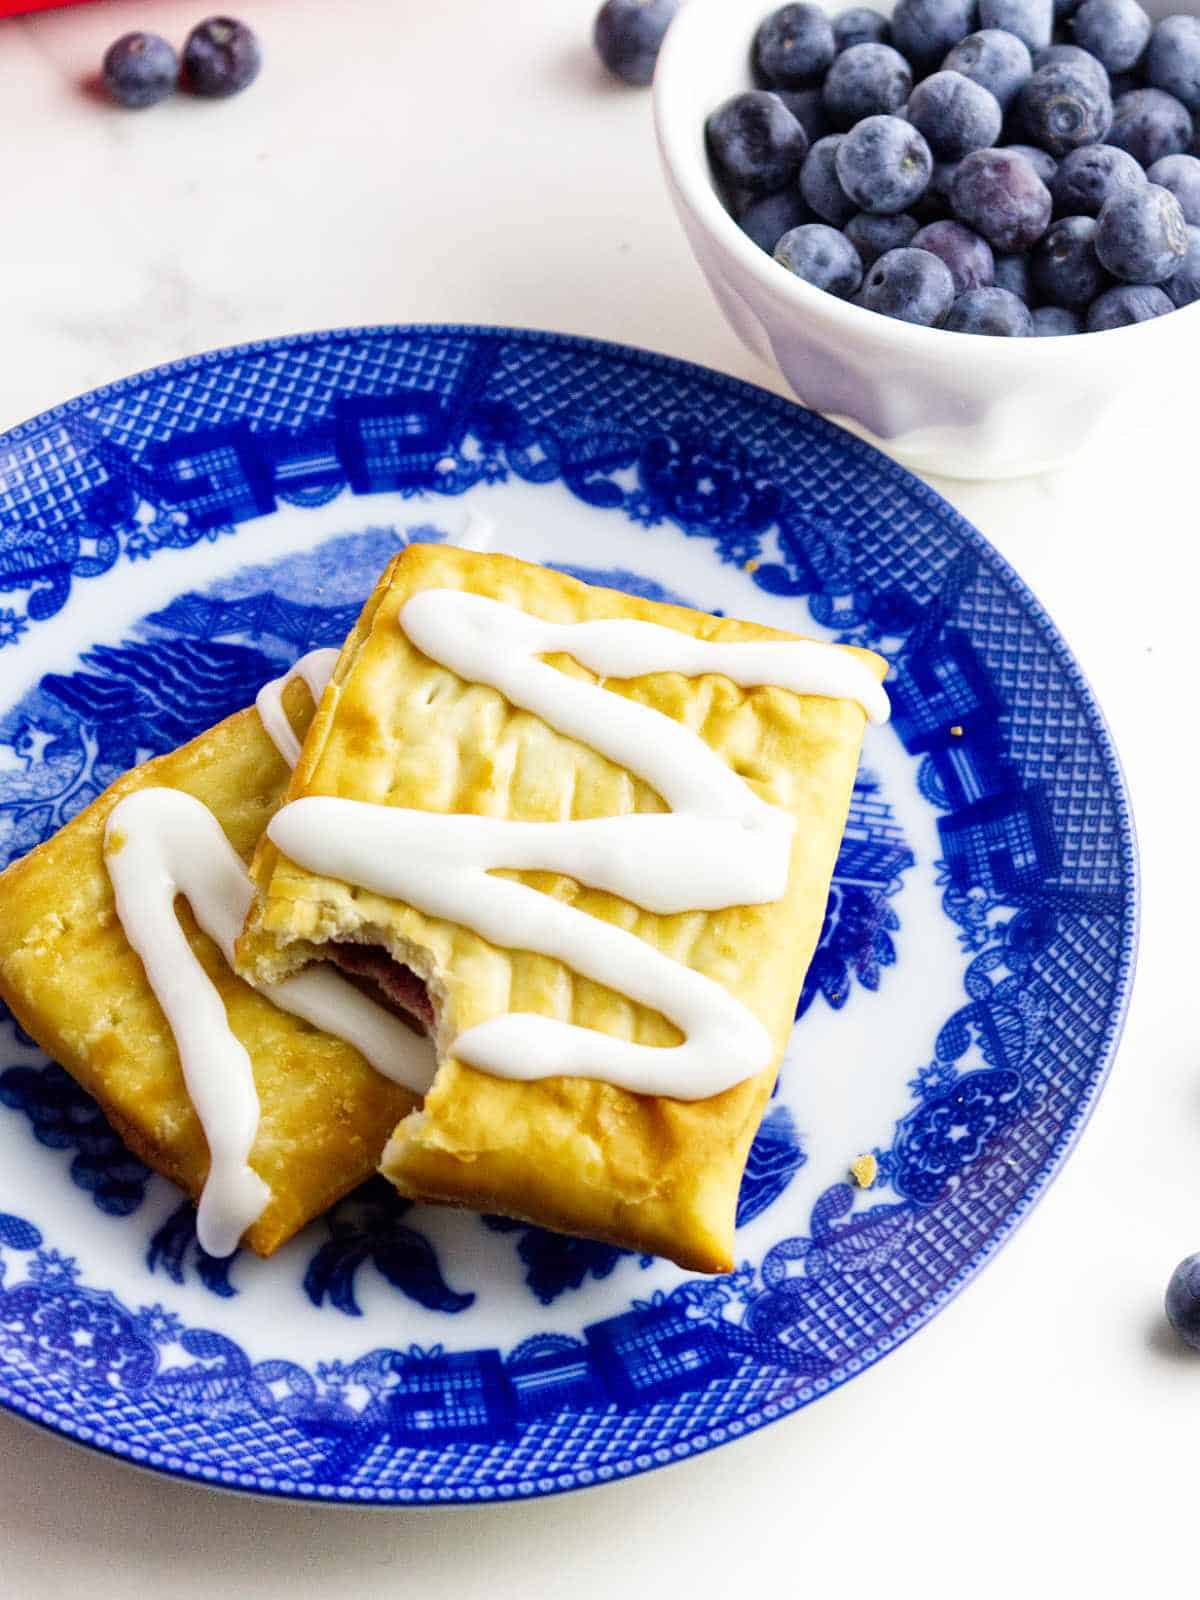 blue and white plate with iced golden brown pastries, and some blueberries on the white background.